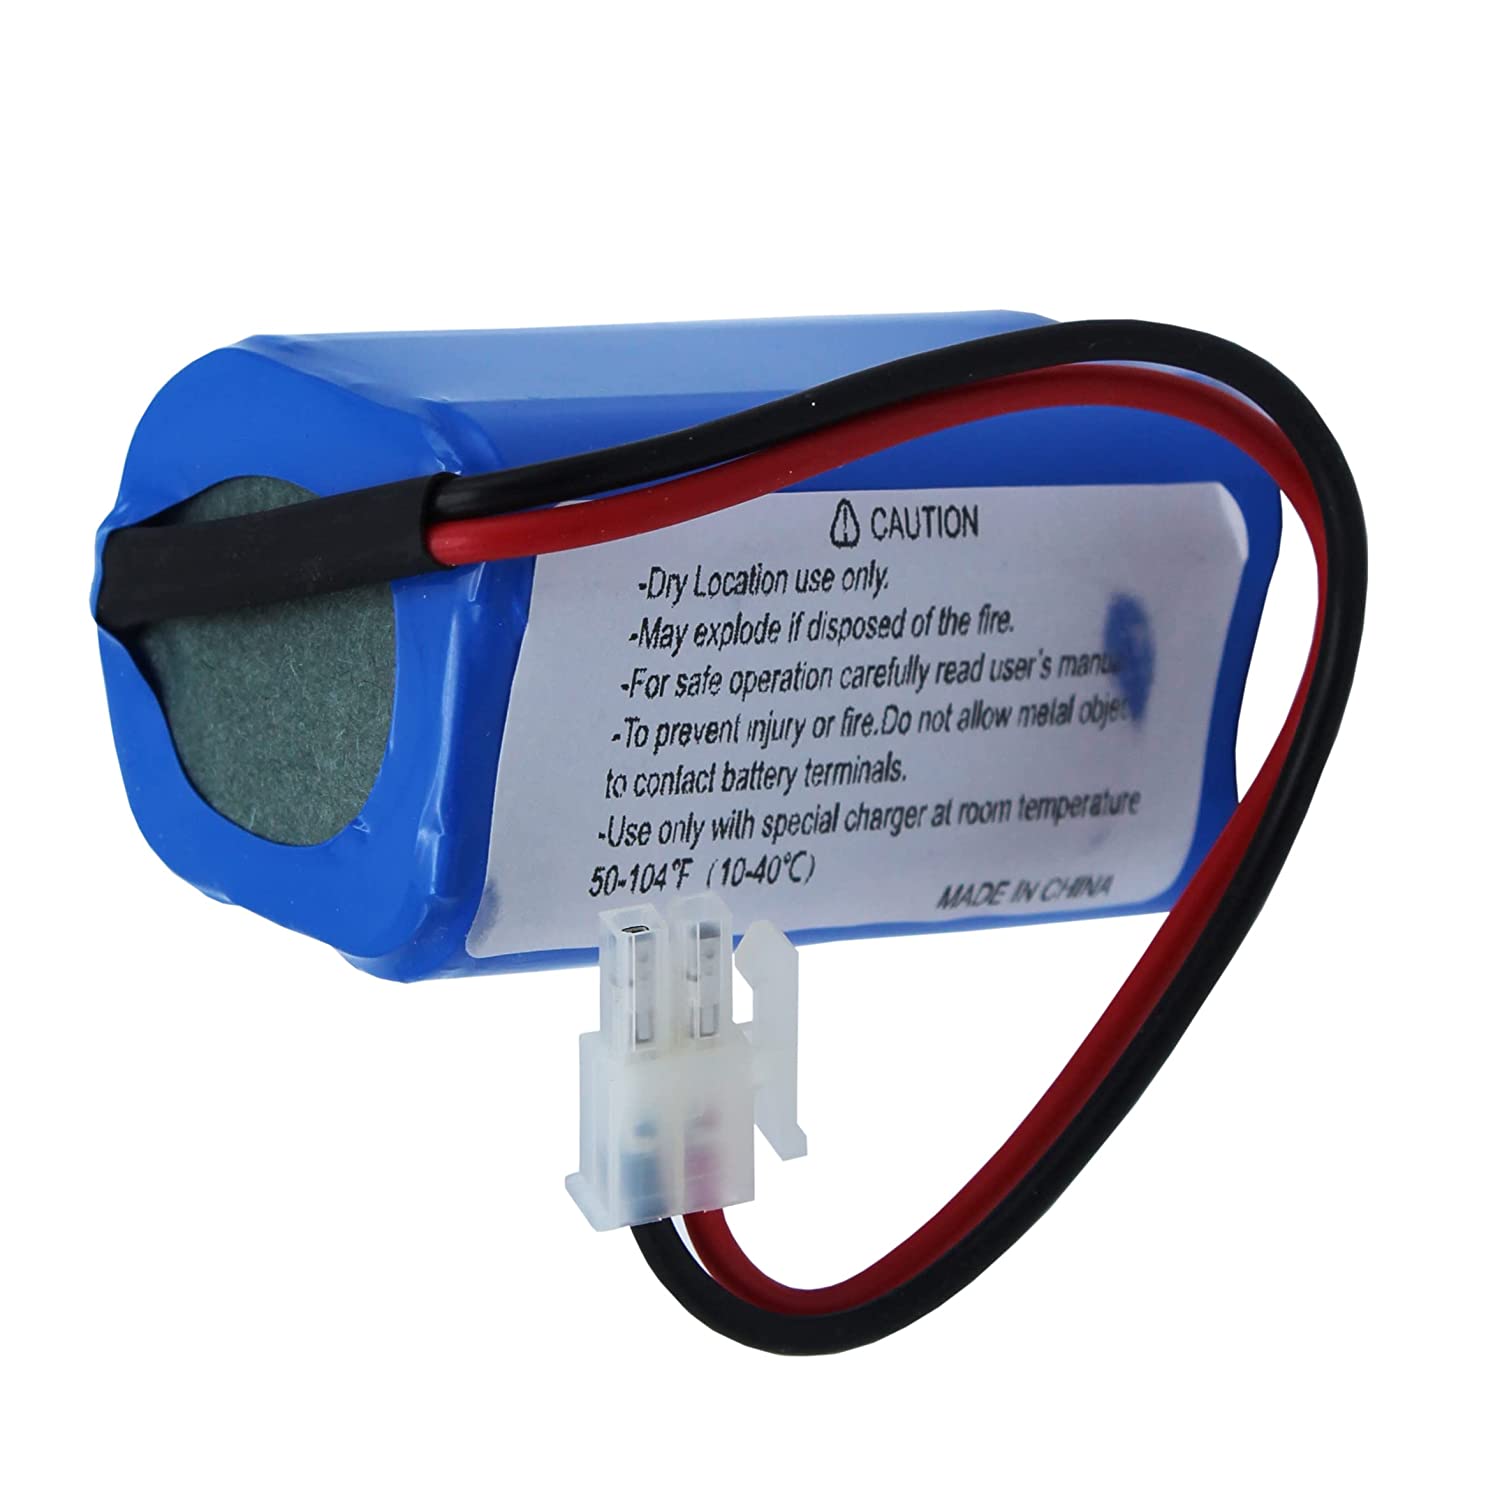  Vacuum Cleaners Battery; velway battery; battery